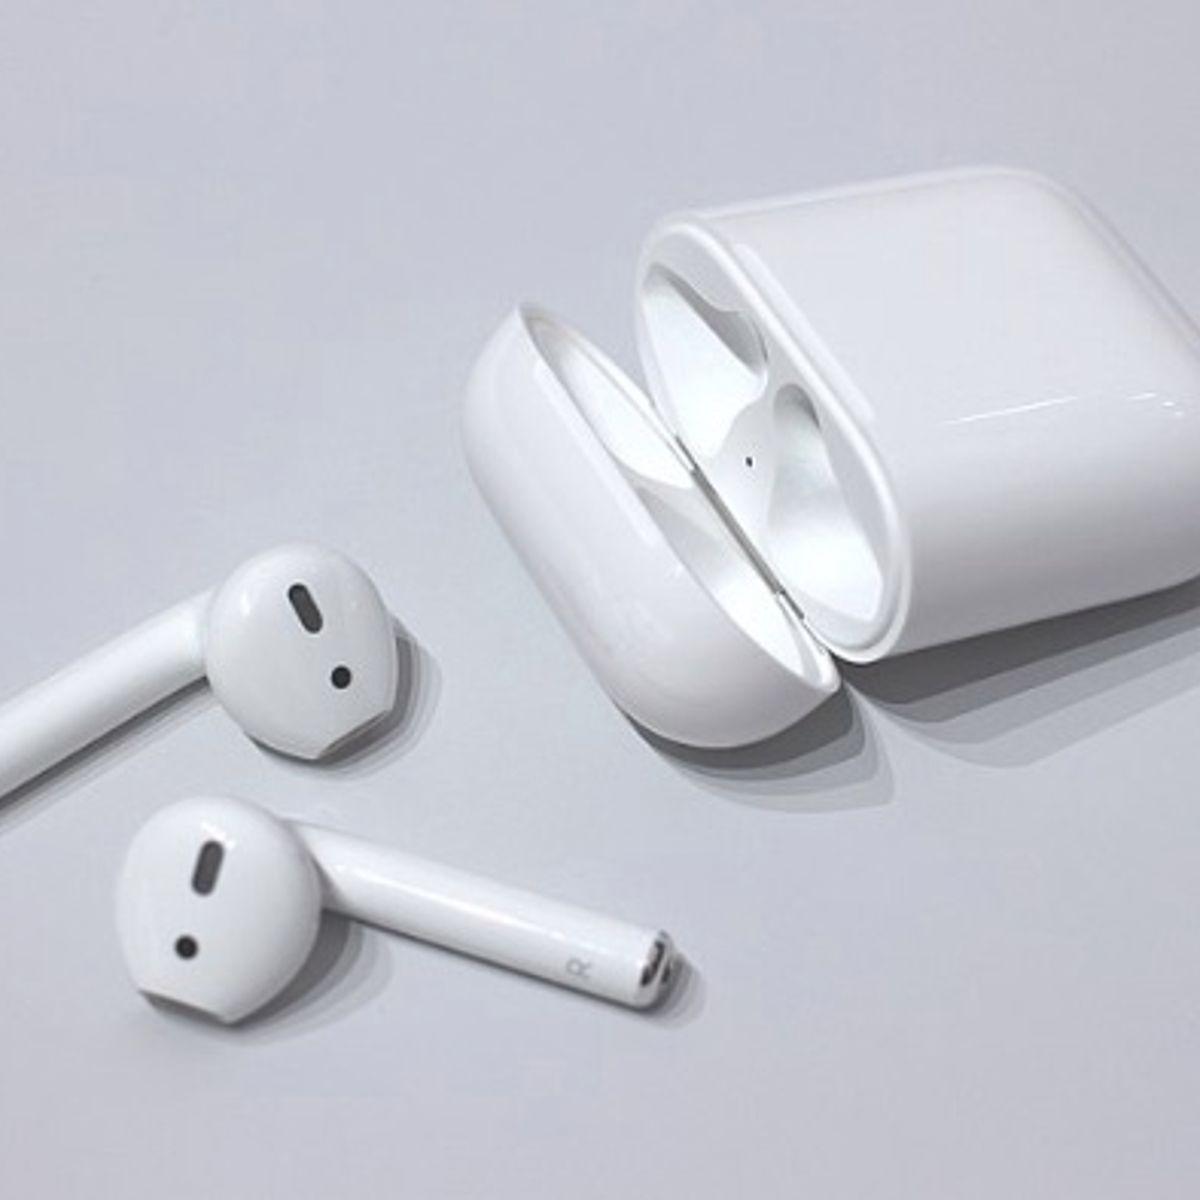 Samme gave negativ Did 250 Scientists Warn that Apple Airpods Pose a Cancer Risk? | Snopes.com